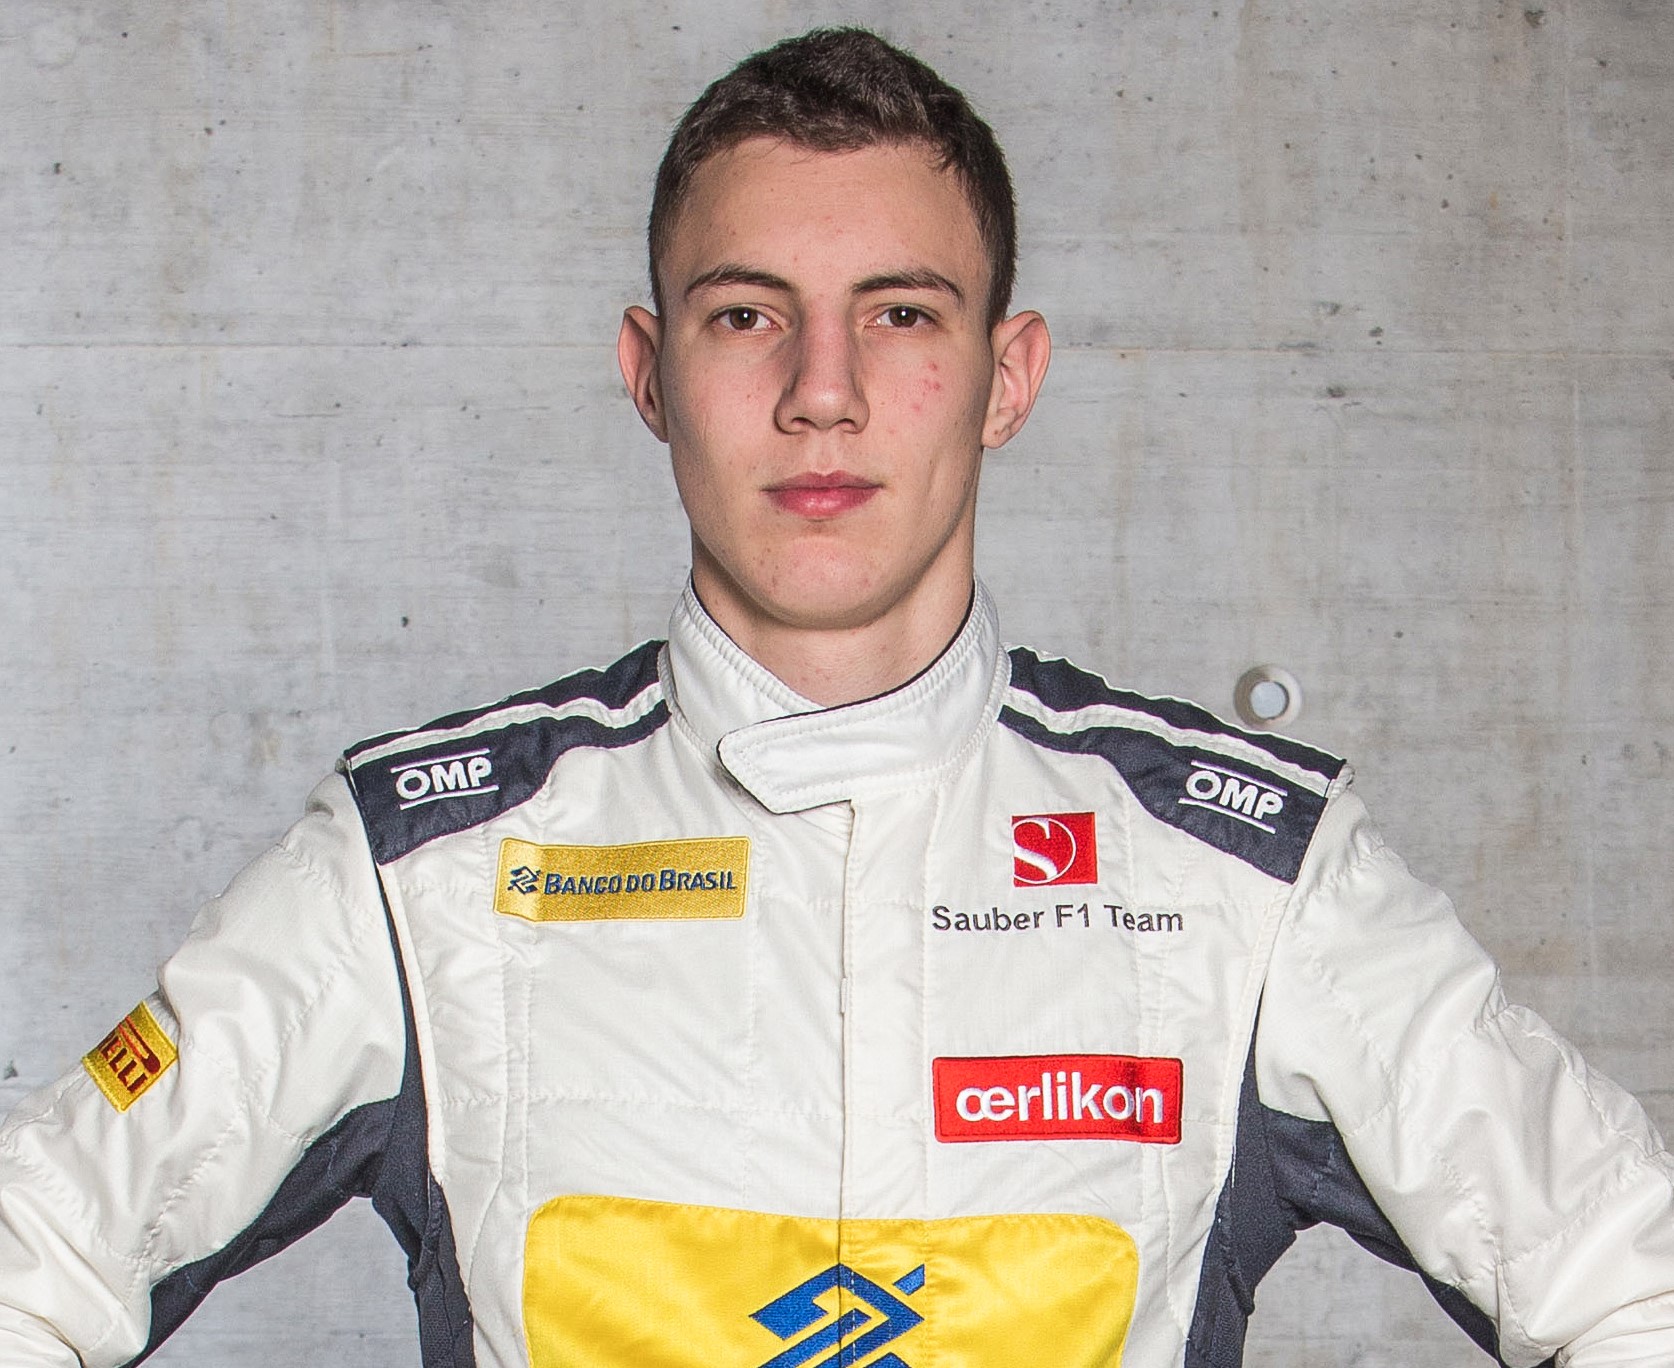 Raffaele Marciello was not considered F1 material because his check was not large enough